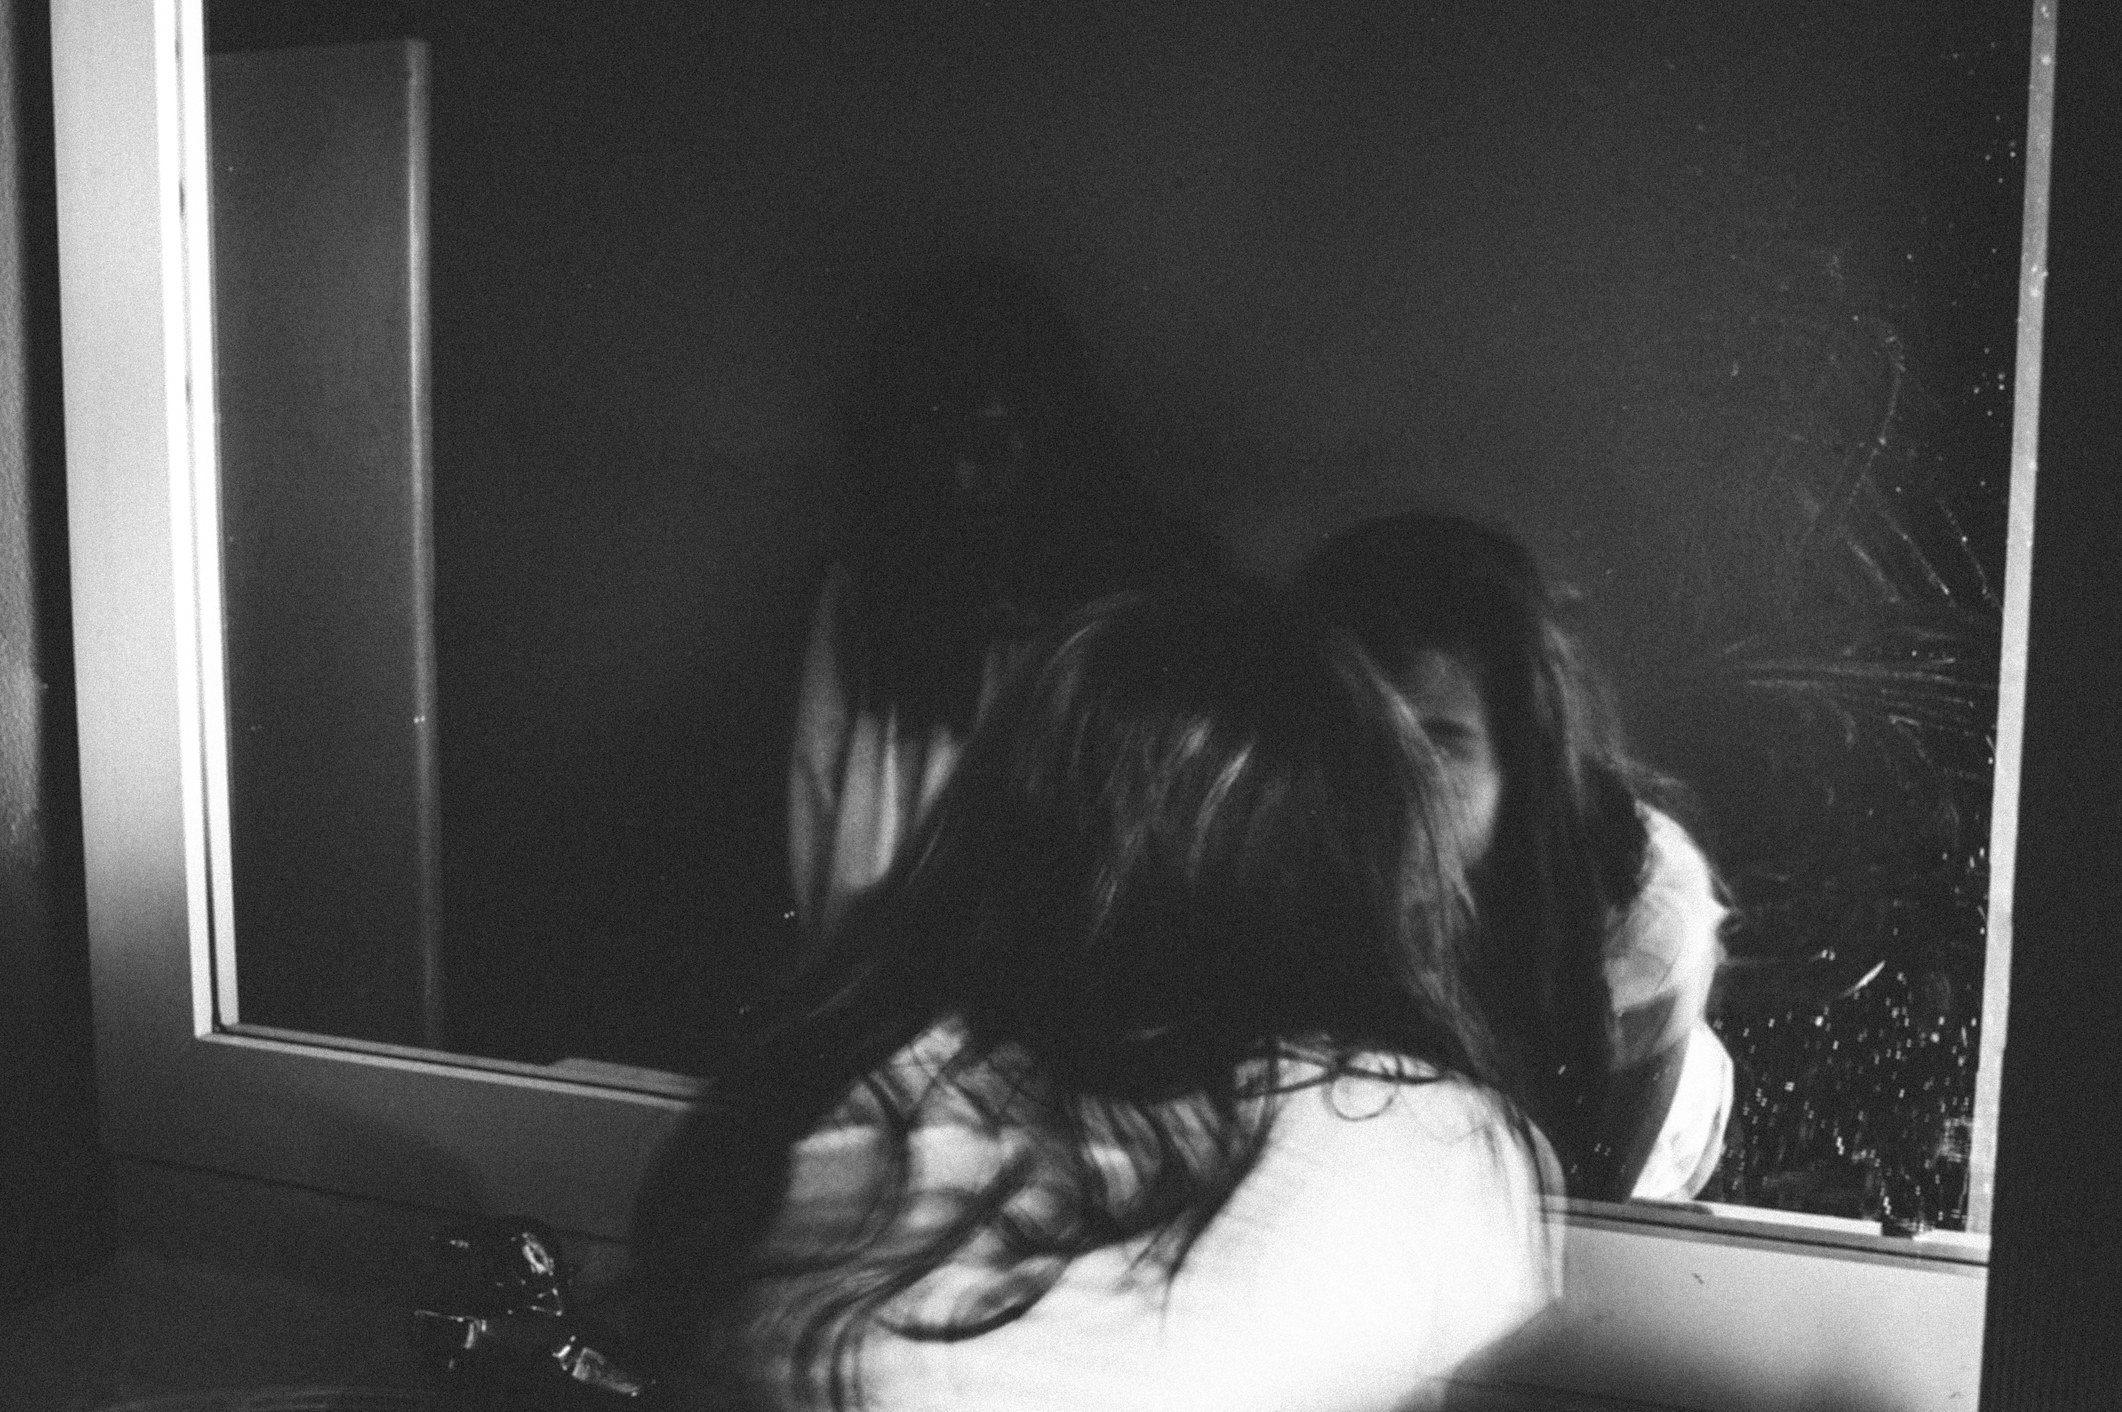 A girl leaning close to the mirror as a shadowy figure looks from behind her